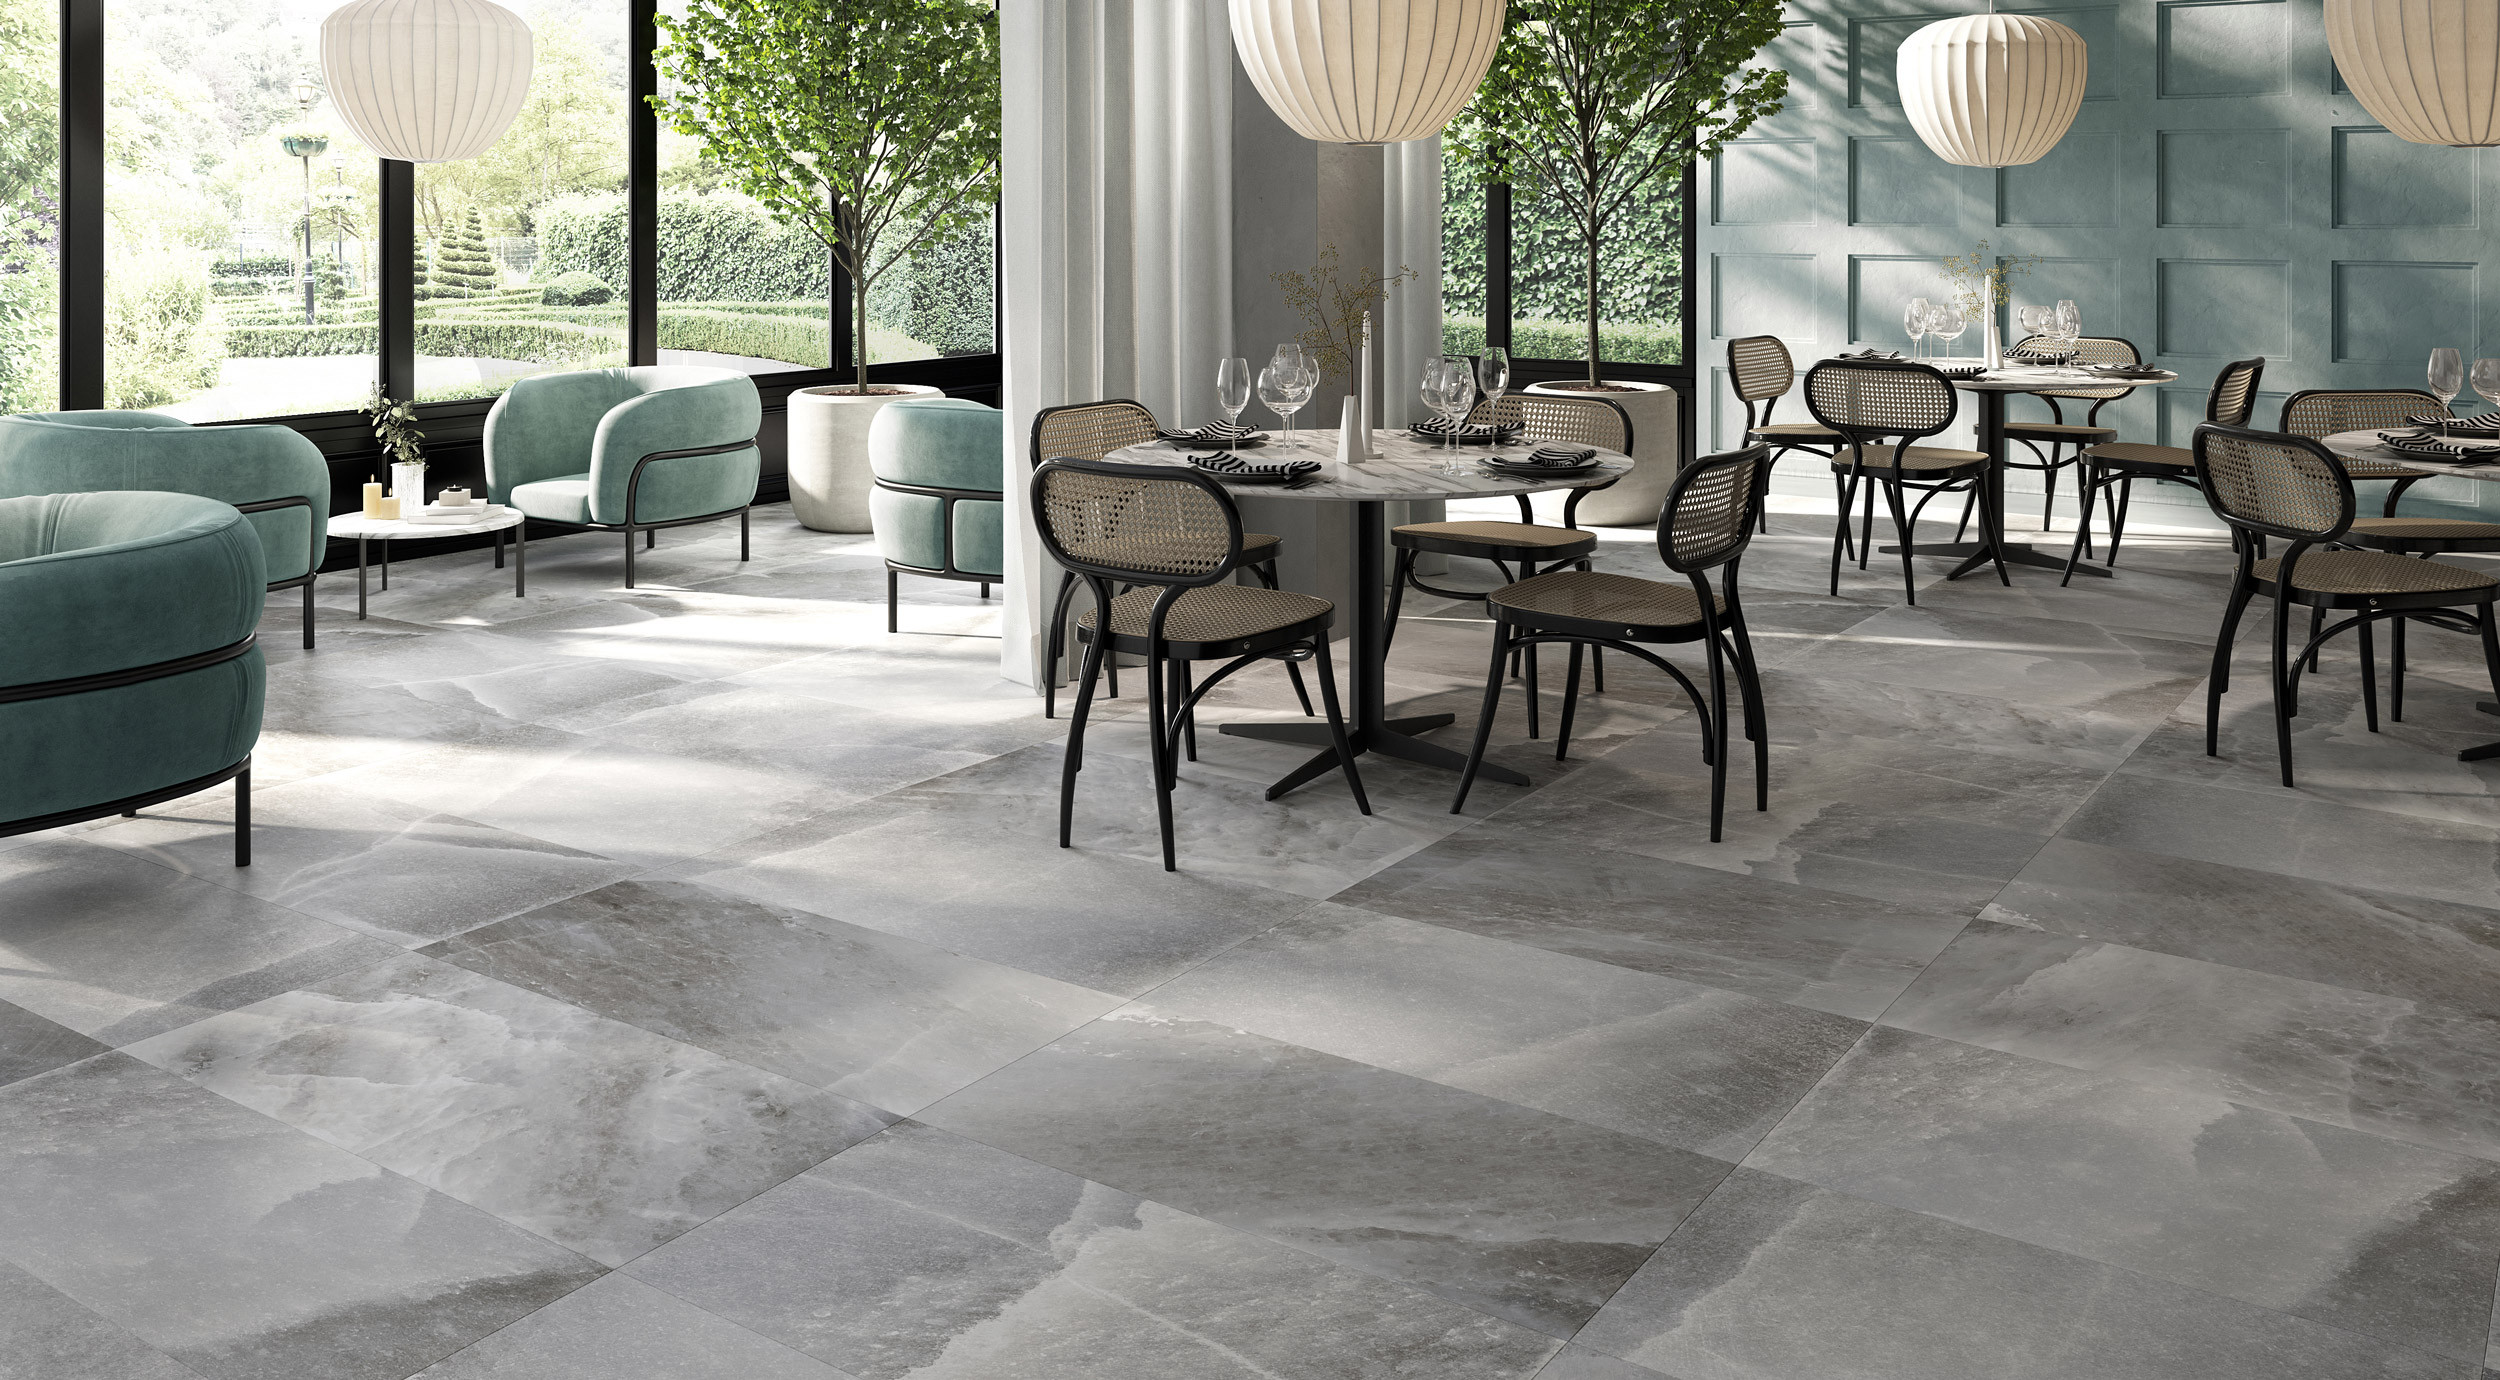 HIMALAYA granite effect porcelain tile floor by RONDINE color GREY LAPPATO
